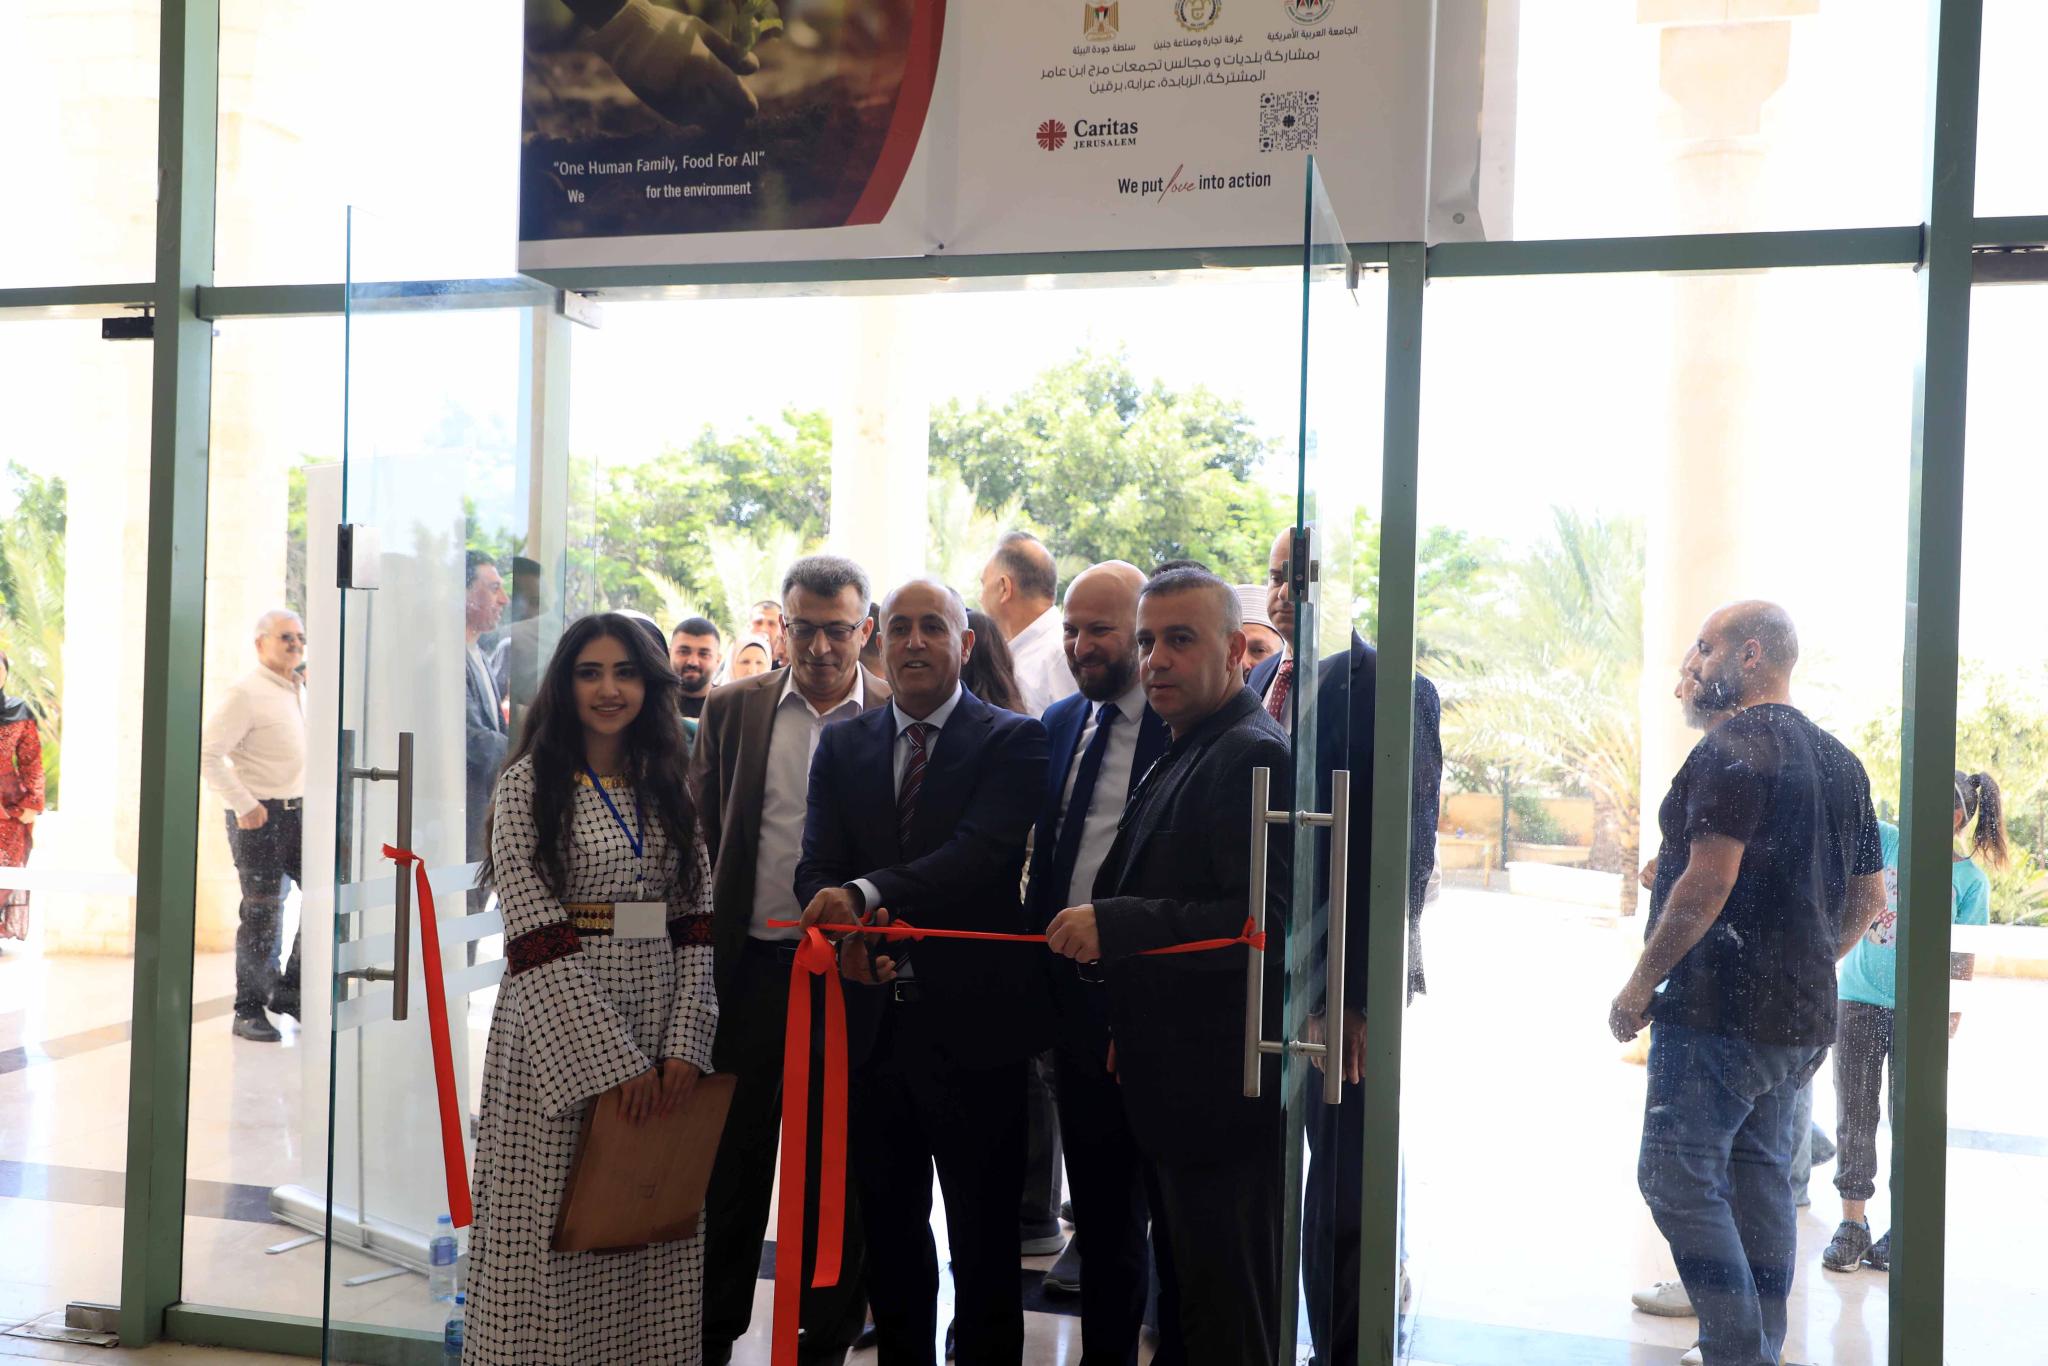 AAUP Holds an Environmental Agriculture Event and Inaugurates a National Product Marketing Exhibition